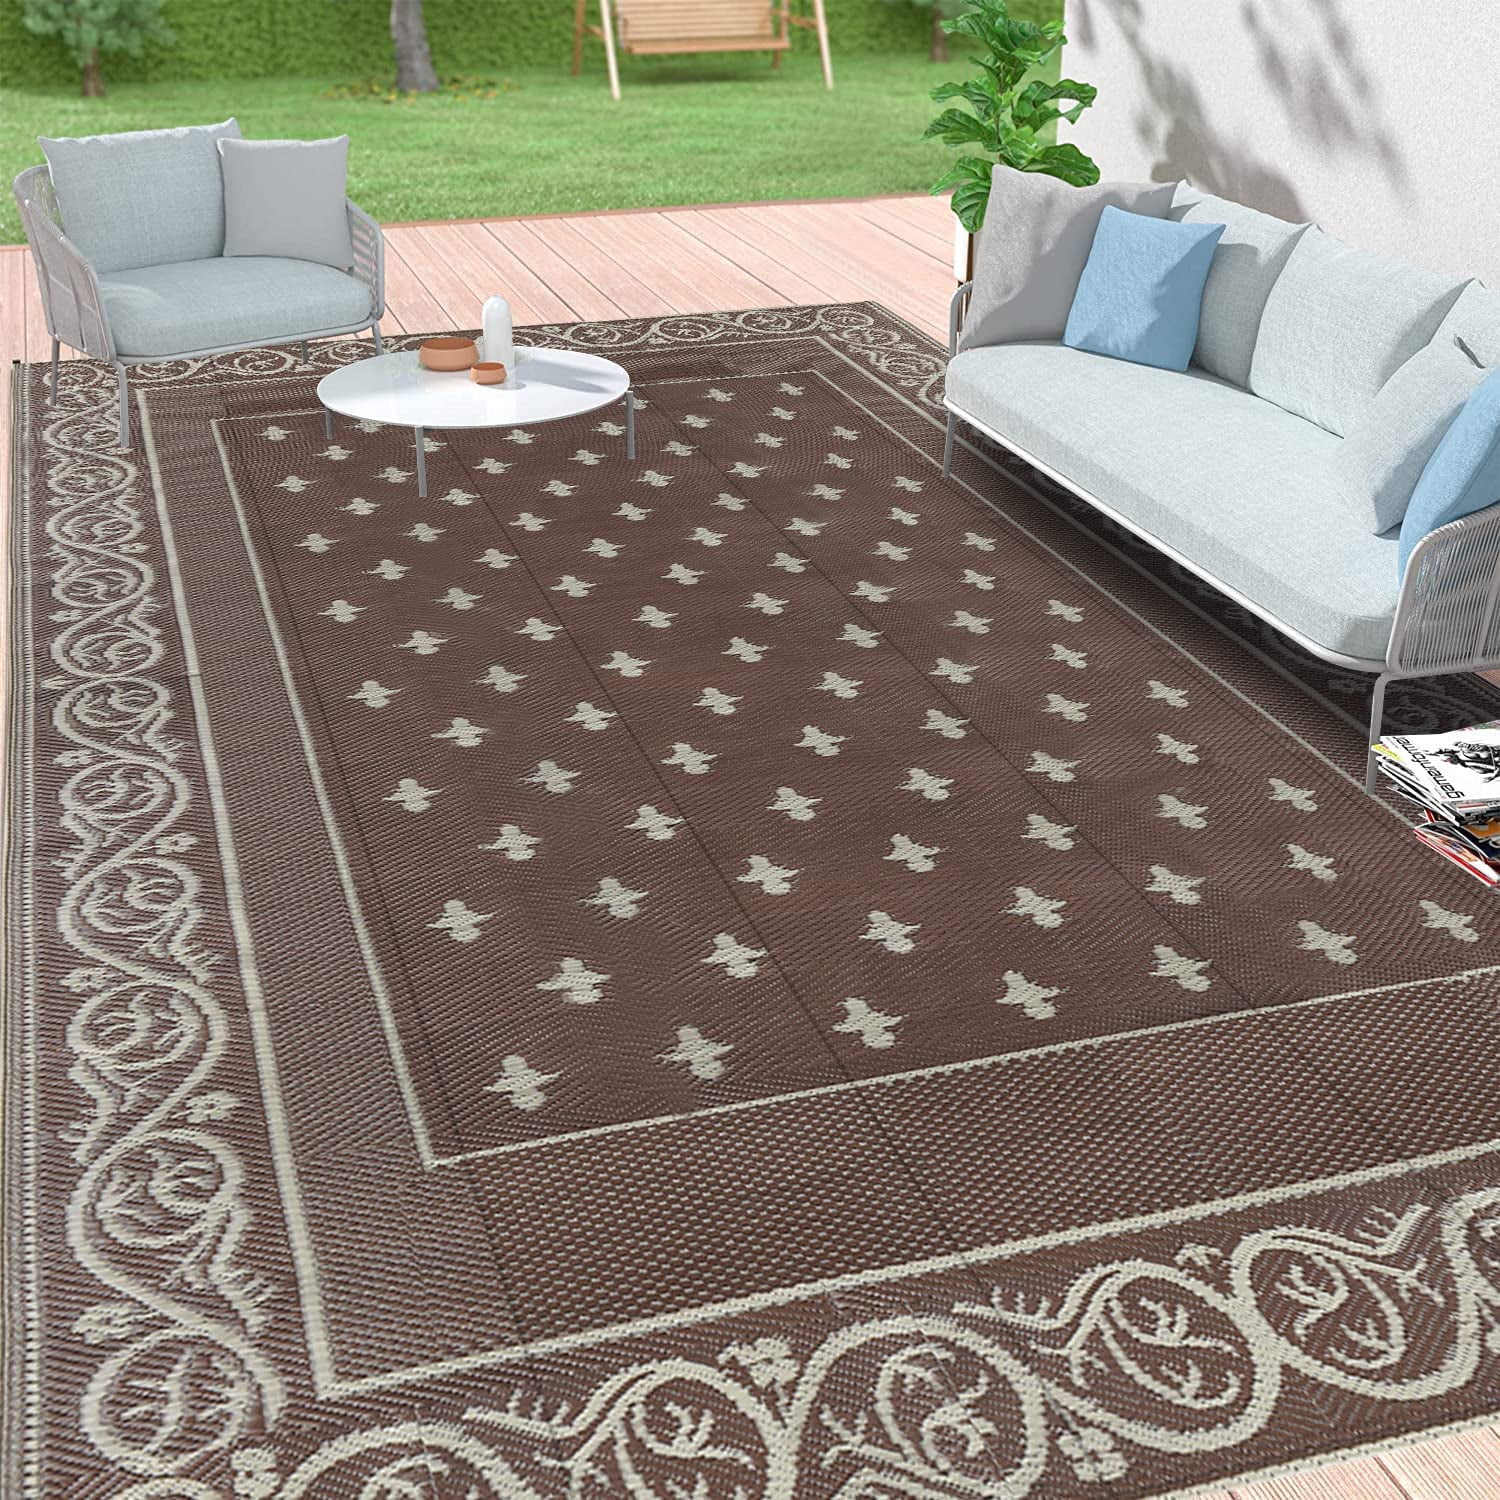 Findosom 9'x12' Brown Large Outdoor Mat RV Outdoor Rug Reversible